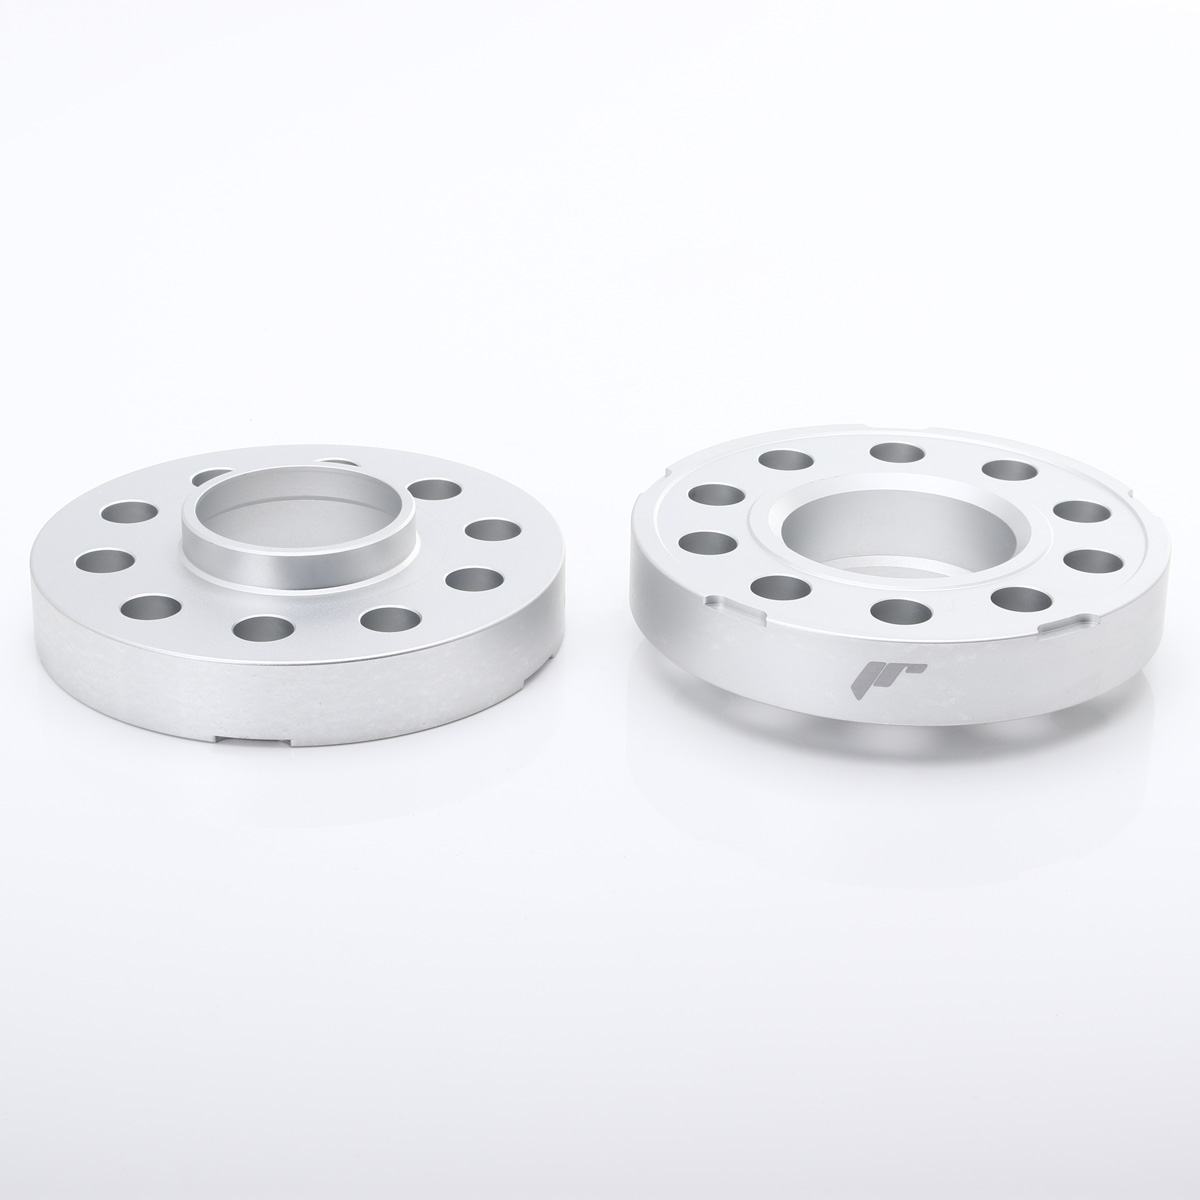 JRWS2 Spacers 25mm 5x108/110 65,1 65,1 Silver